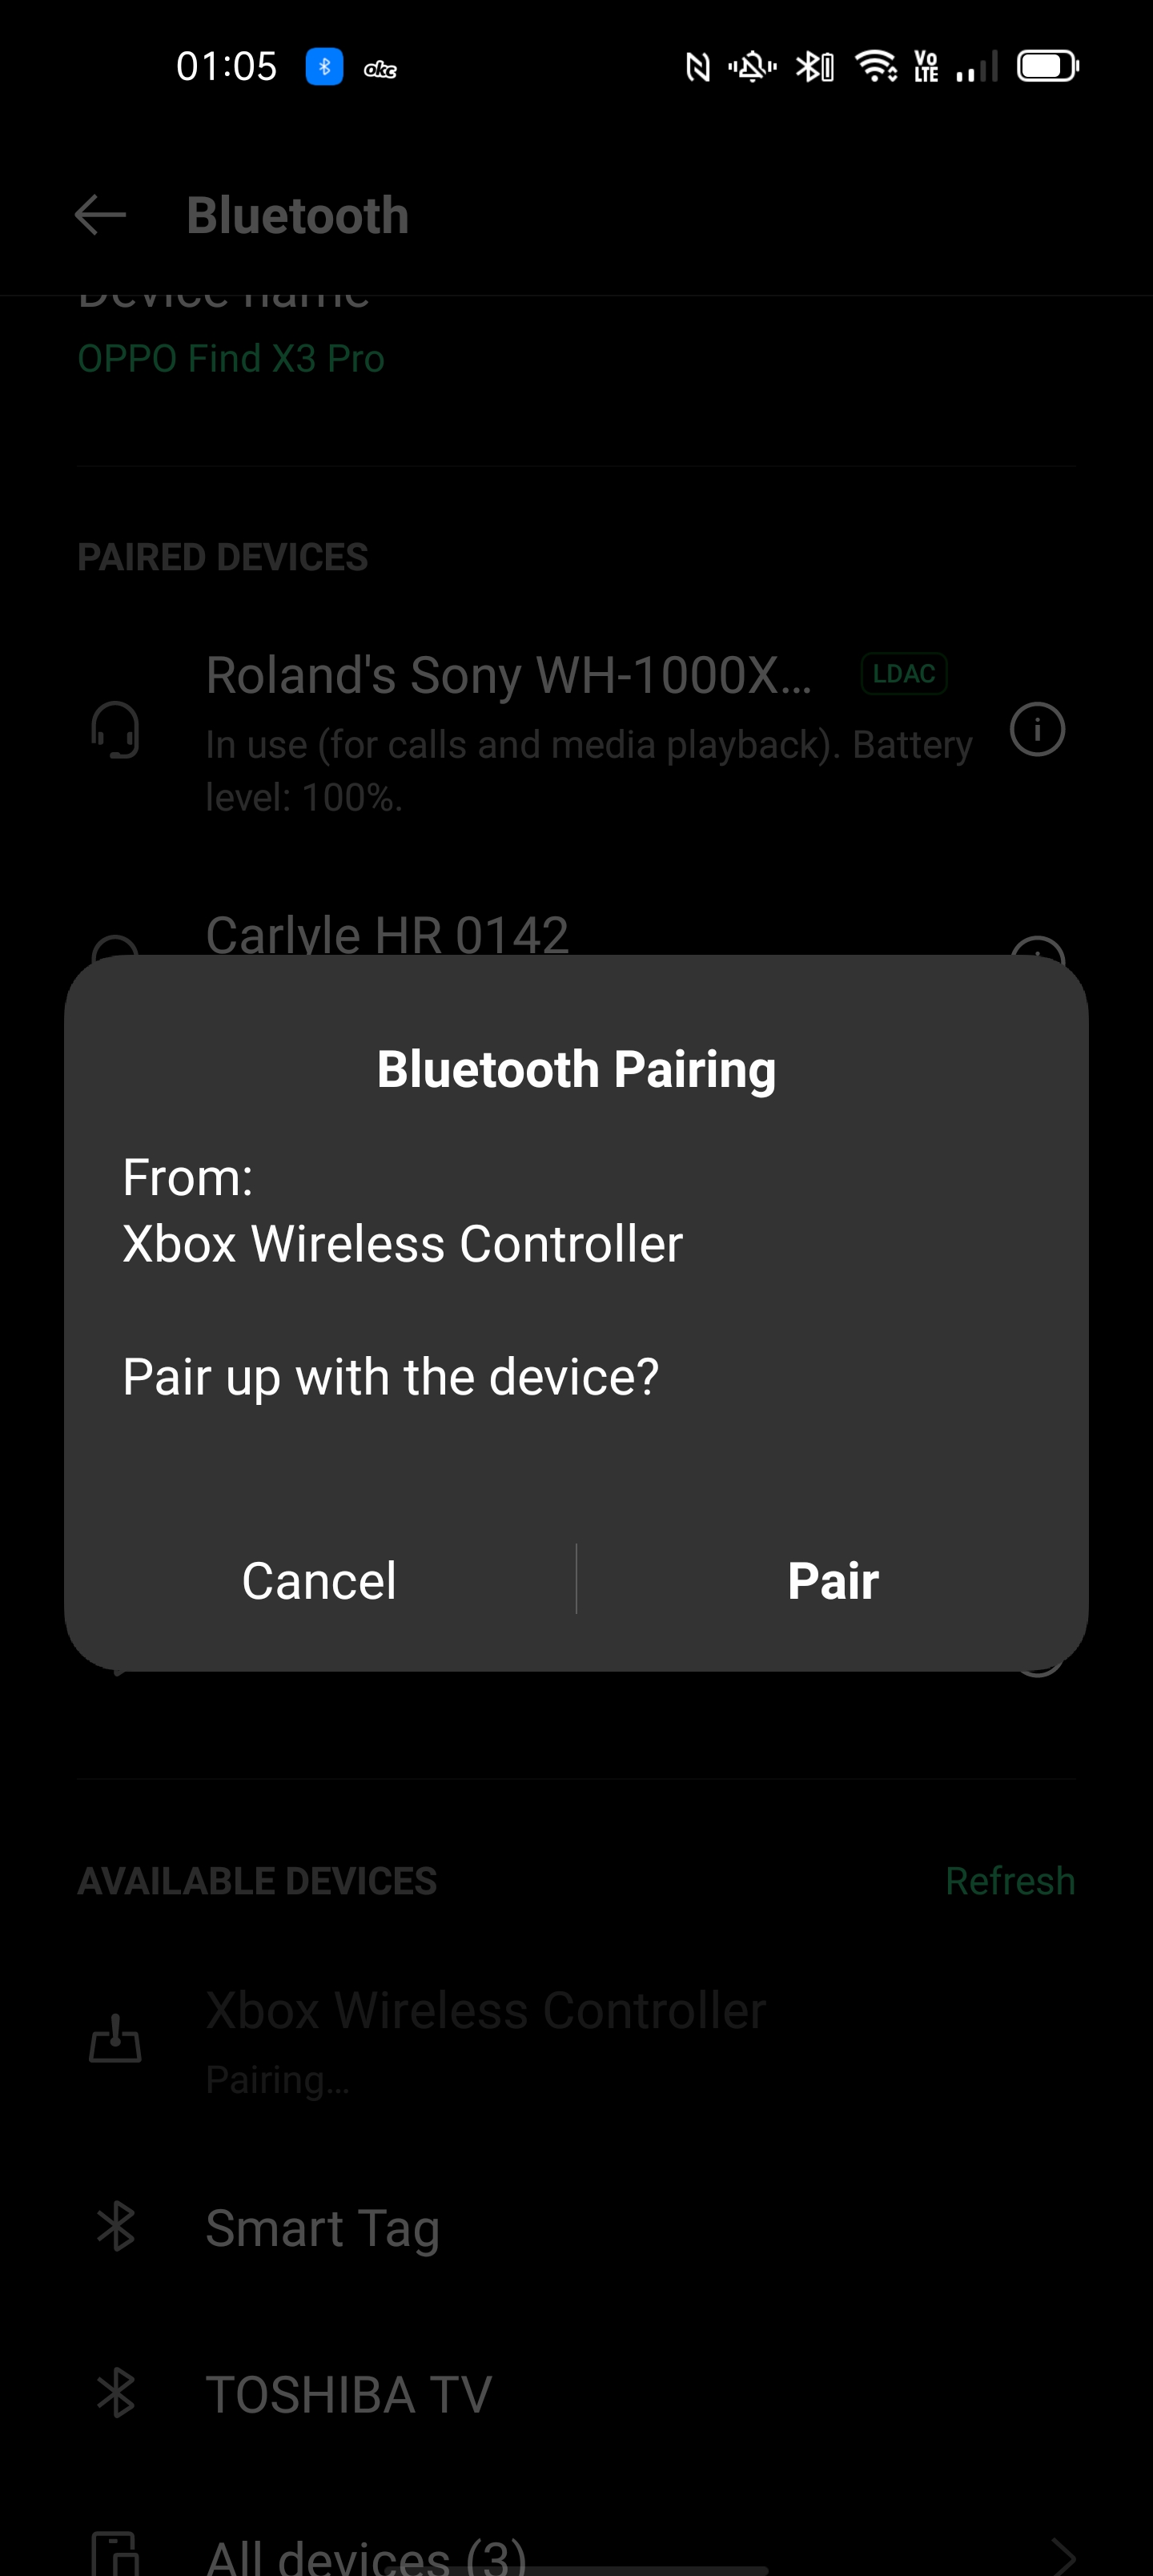 How to connect an Xbox Wireless Controller to Android